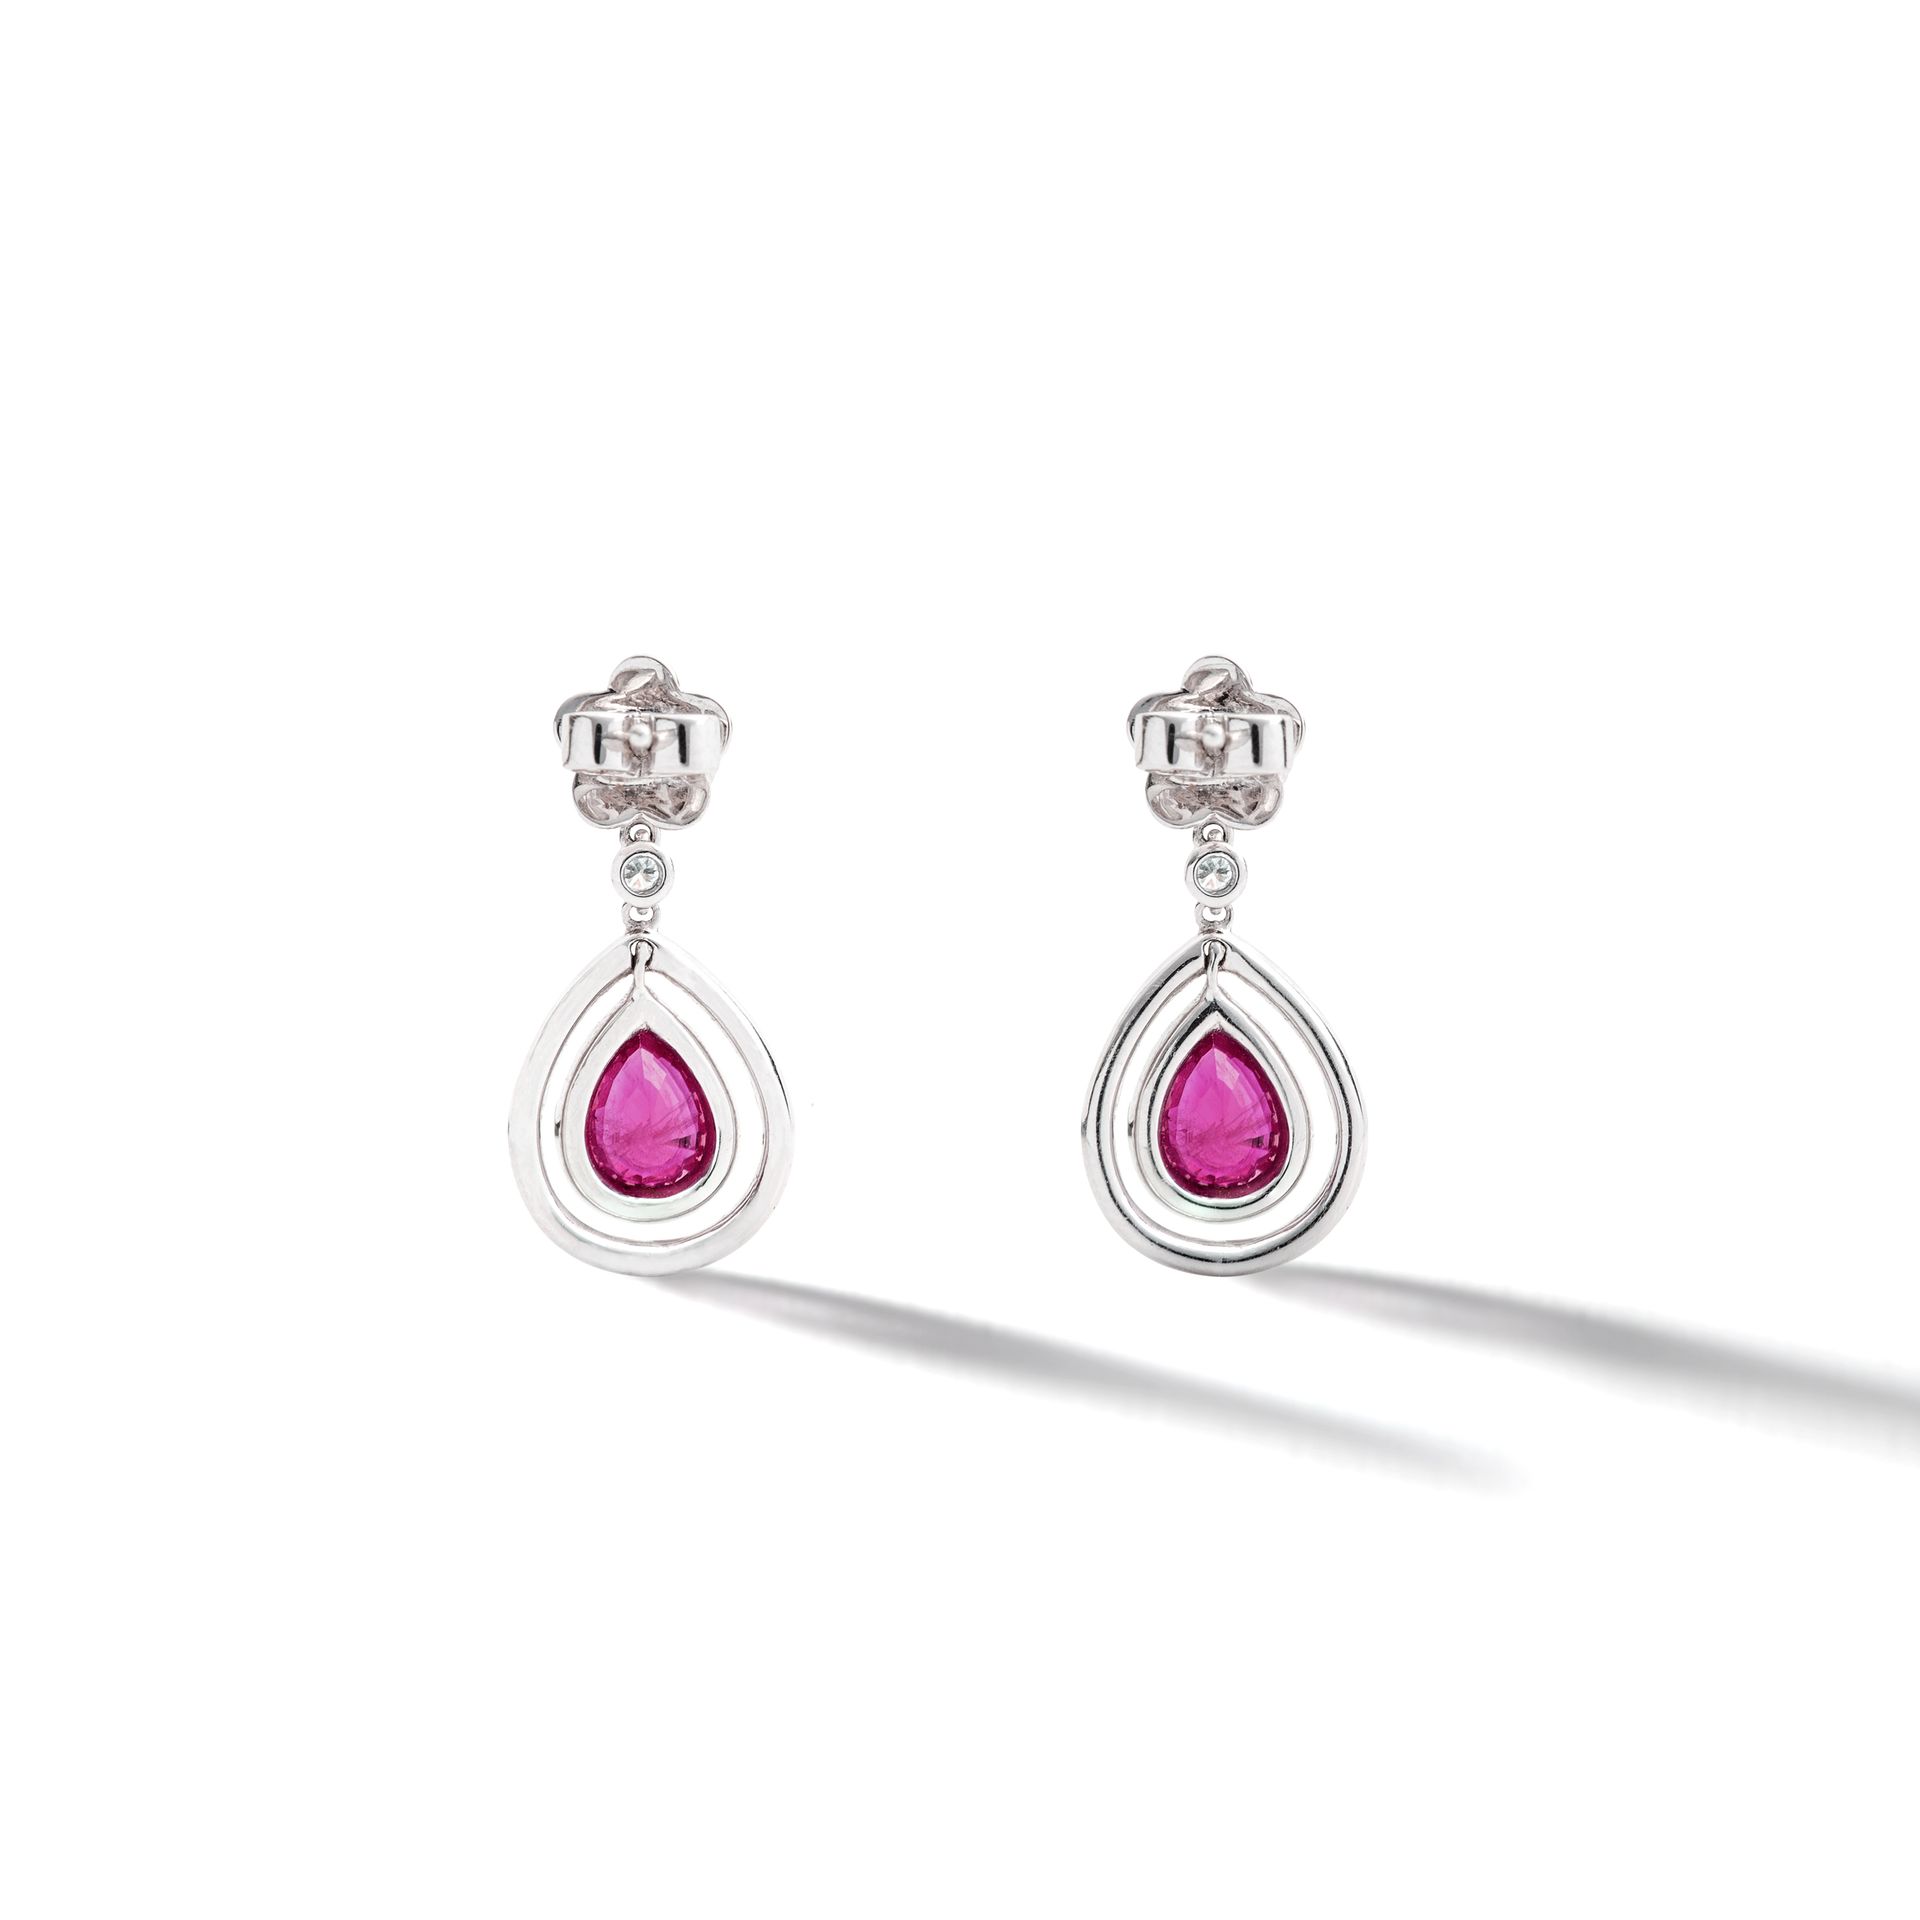 ADLER Earrings in 18 ct white gold in the shape of a double drop paved with diam&hellip;